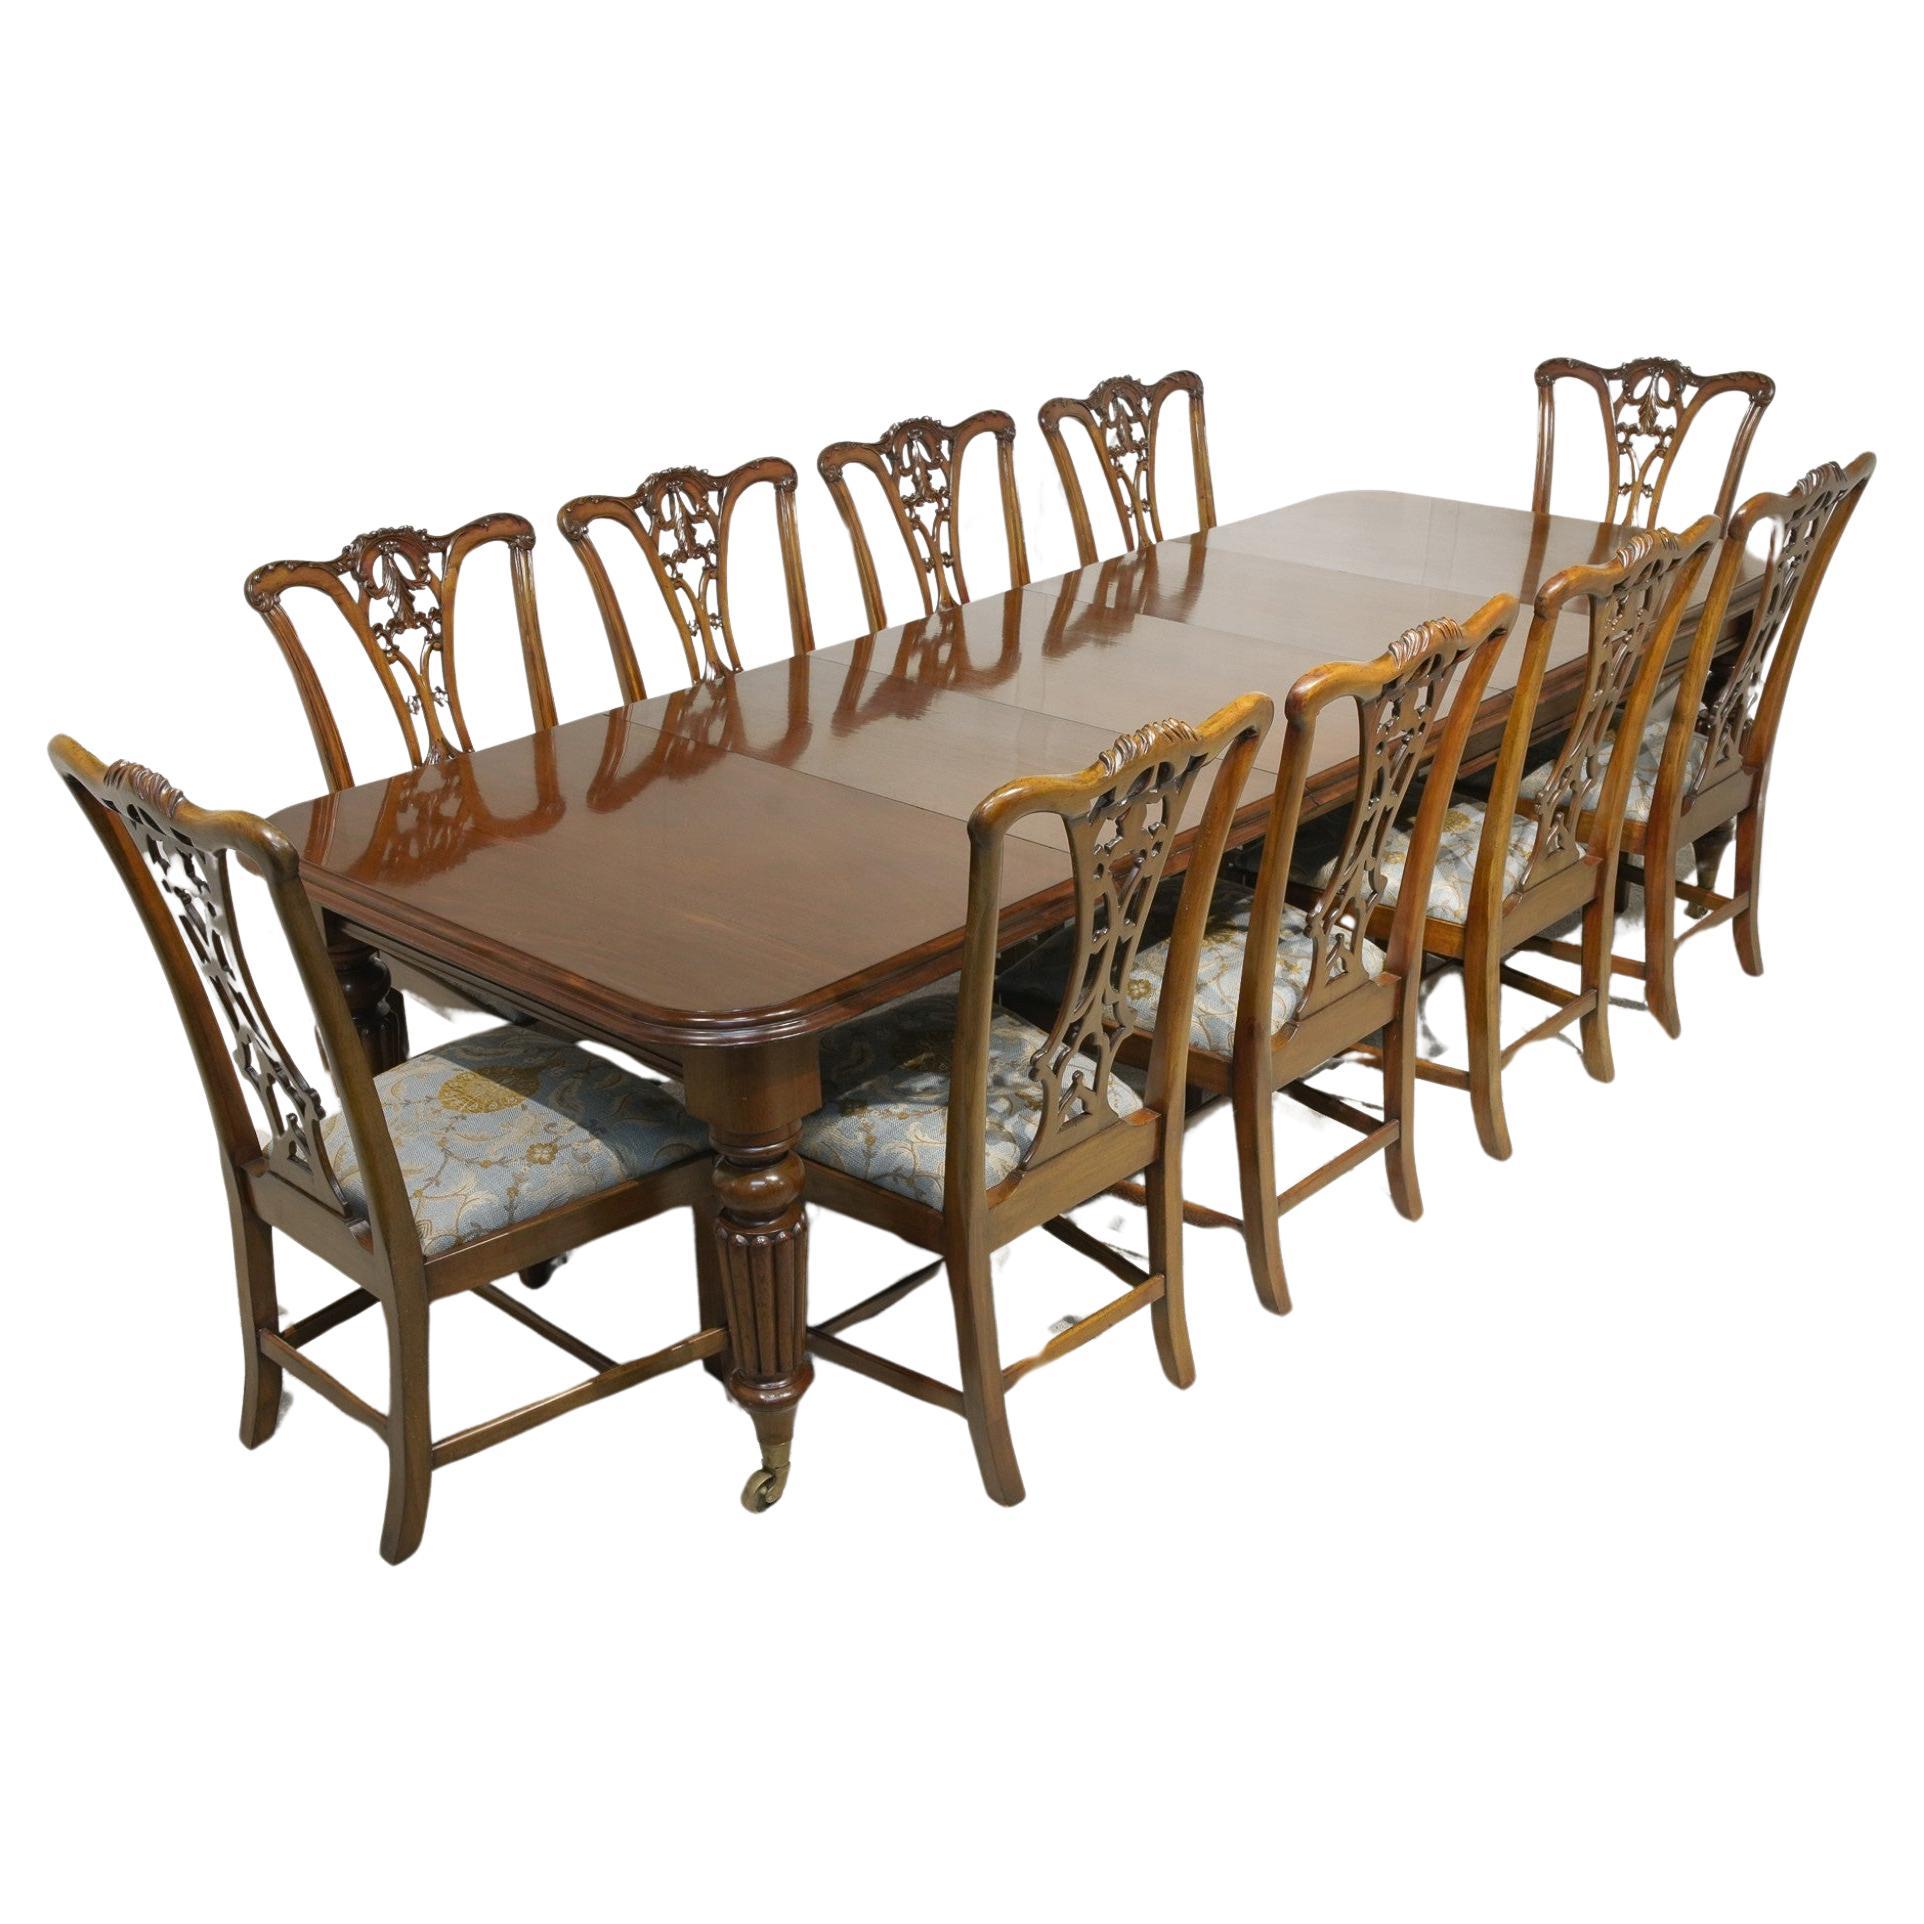 Victorian Dining Table 3 Extending Leaves and 10 chairs For Sale